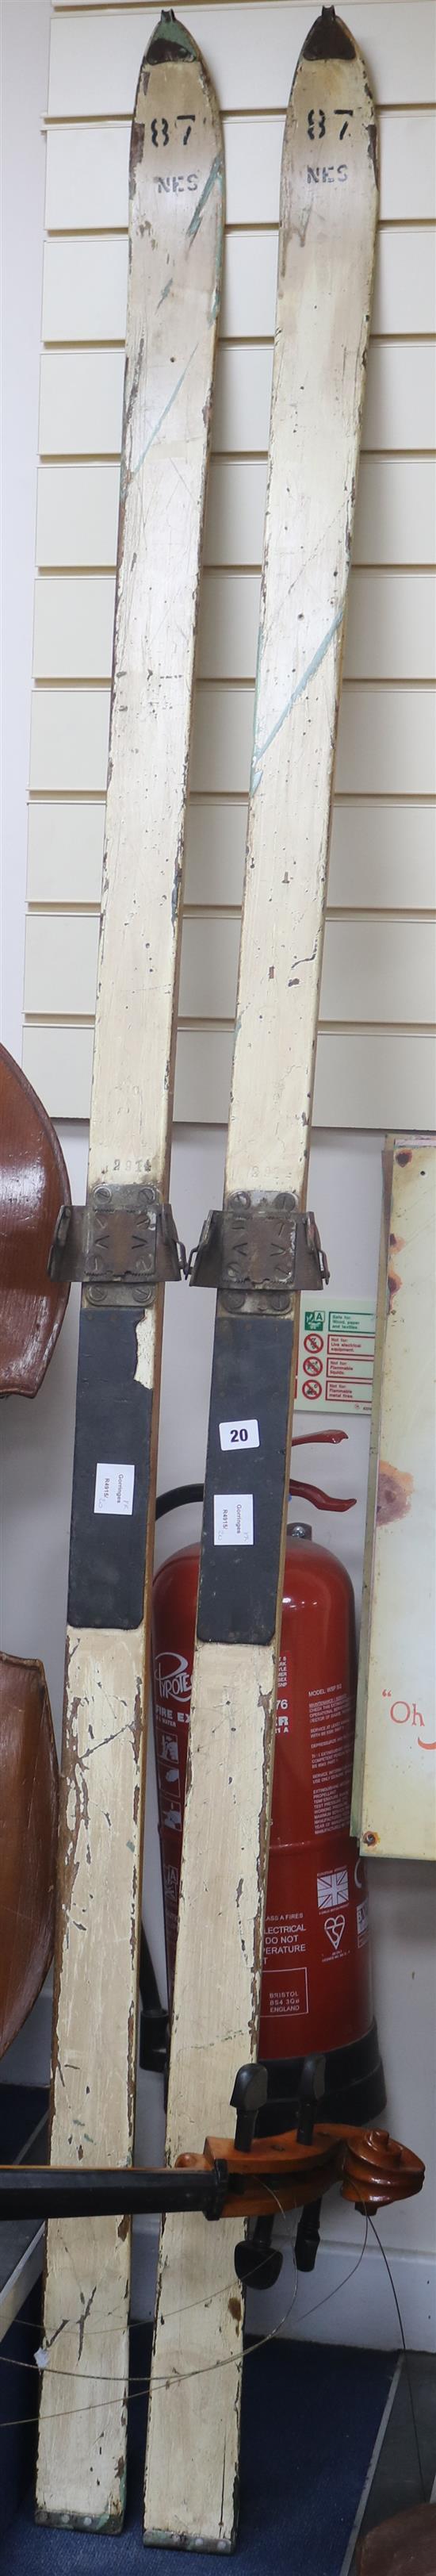 A pair of vintage wooden skis